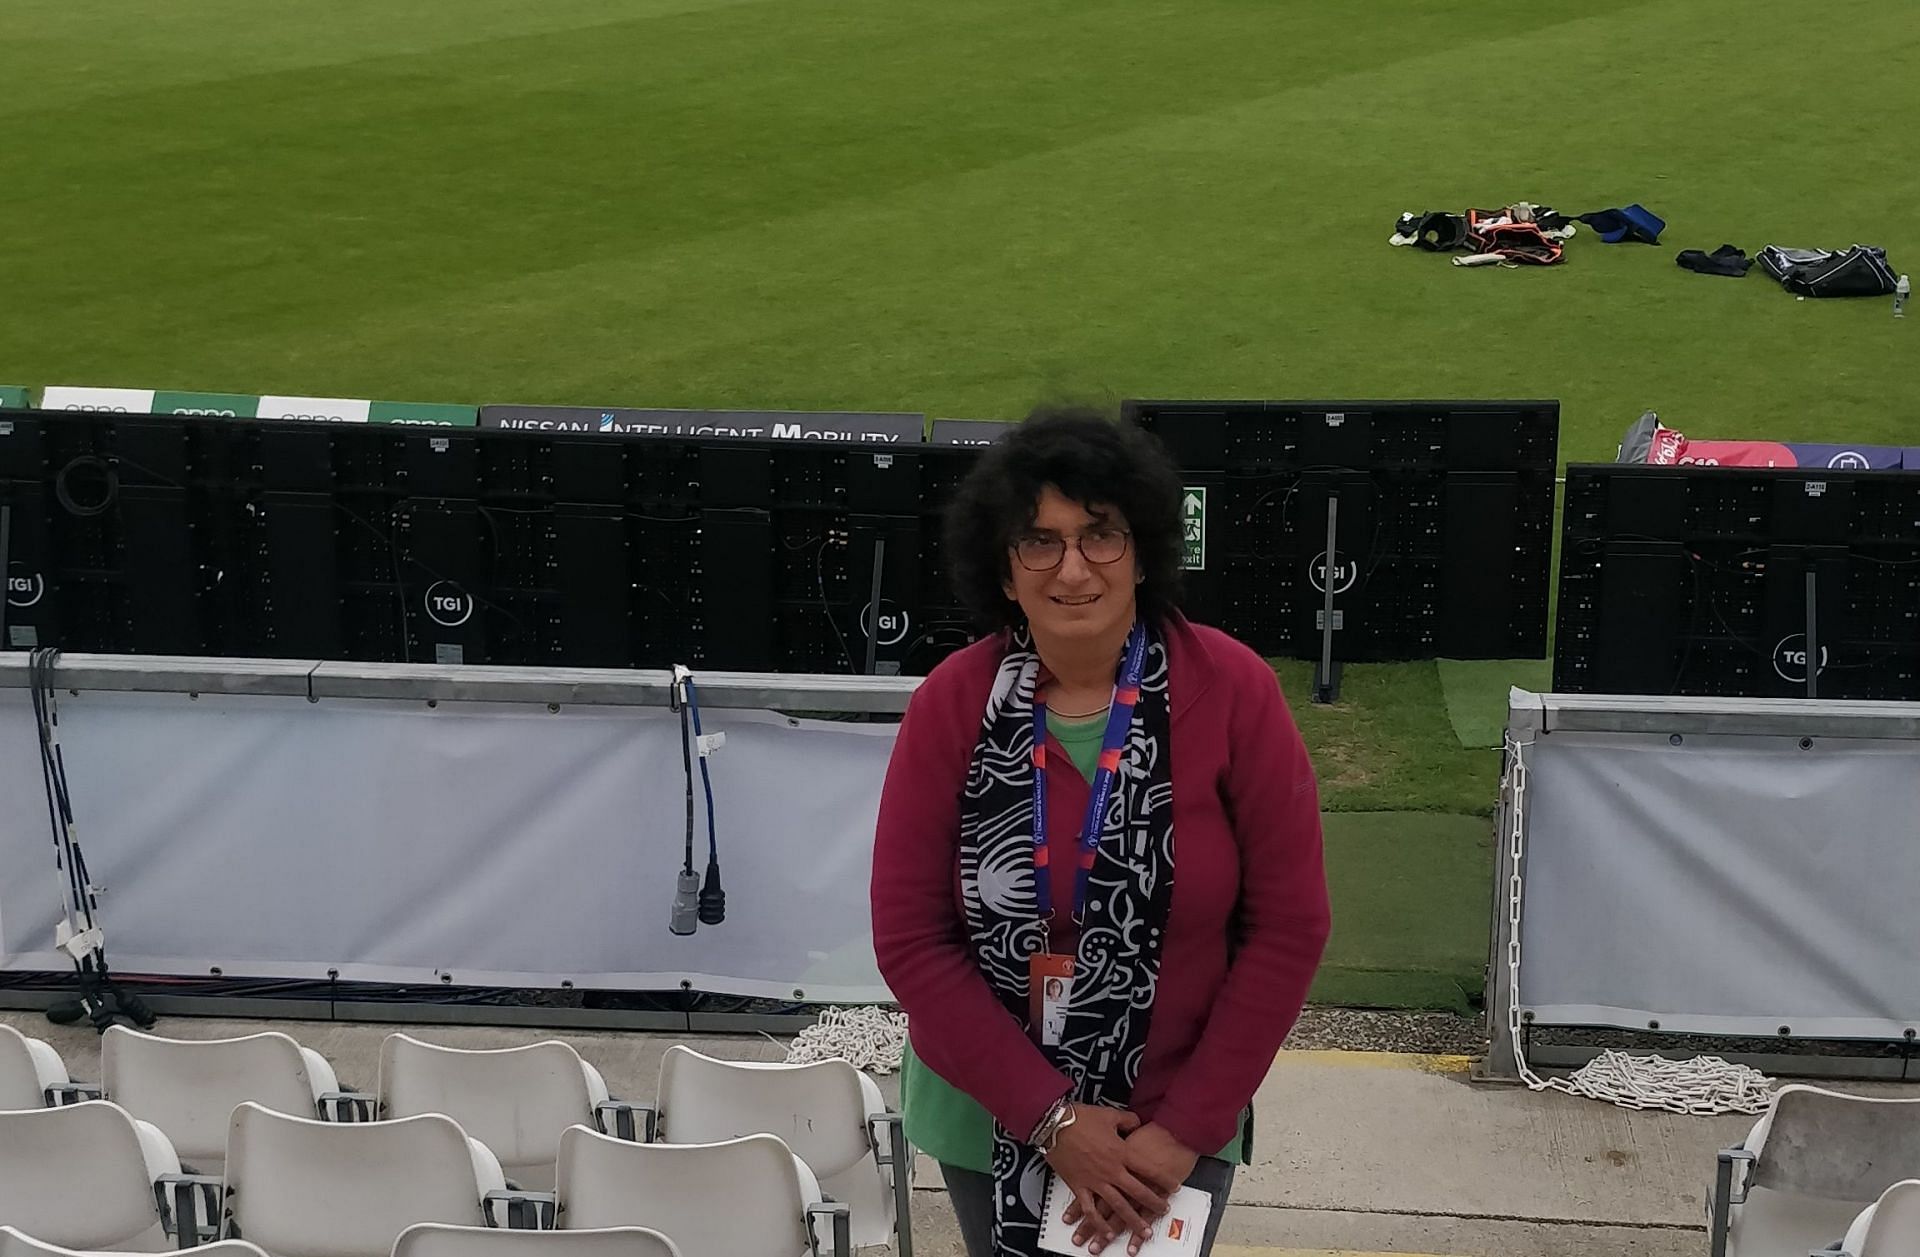 Ms Sharda Ugra at the Chester-le-Street Stadium, England during the 2019 Cricket World Cup. All images are credit Ms. Sharda Ugra.